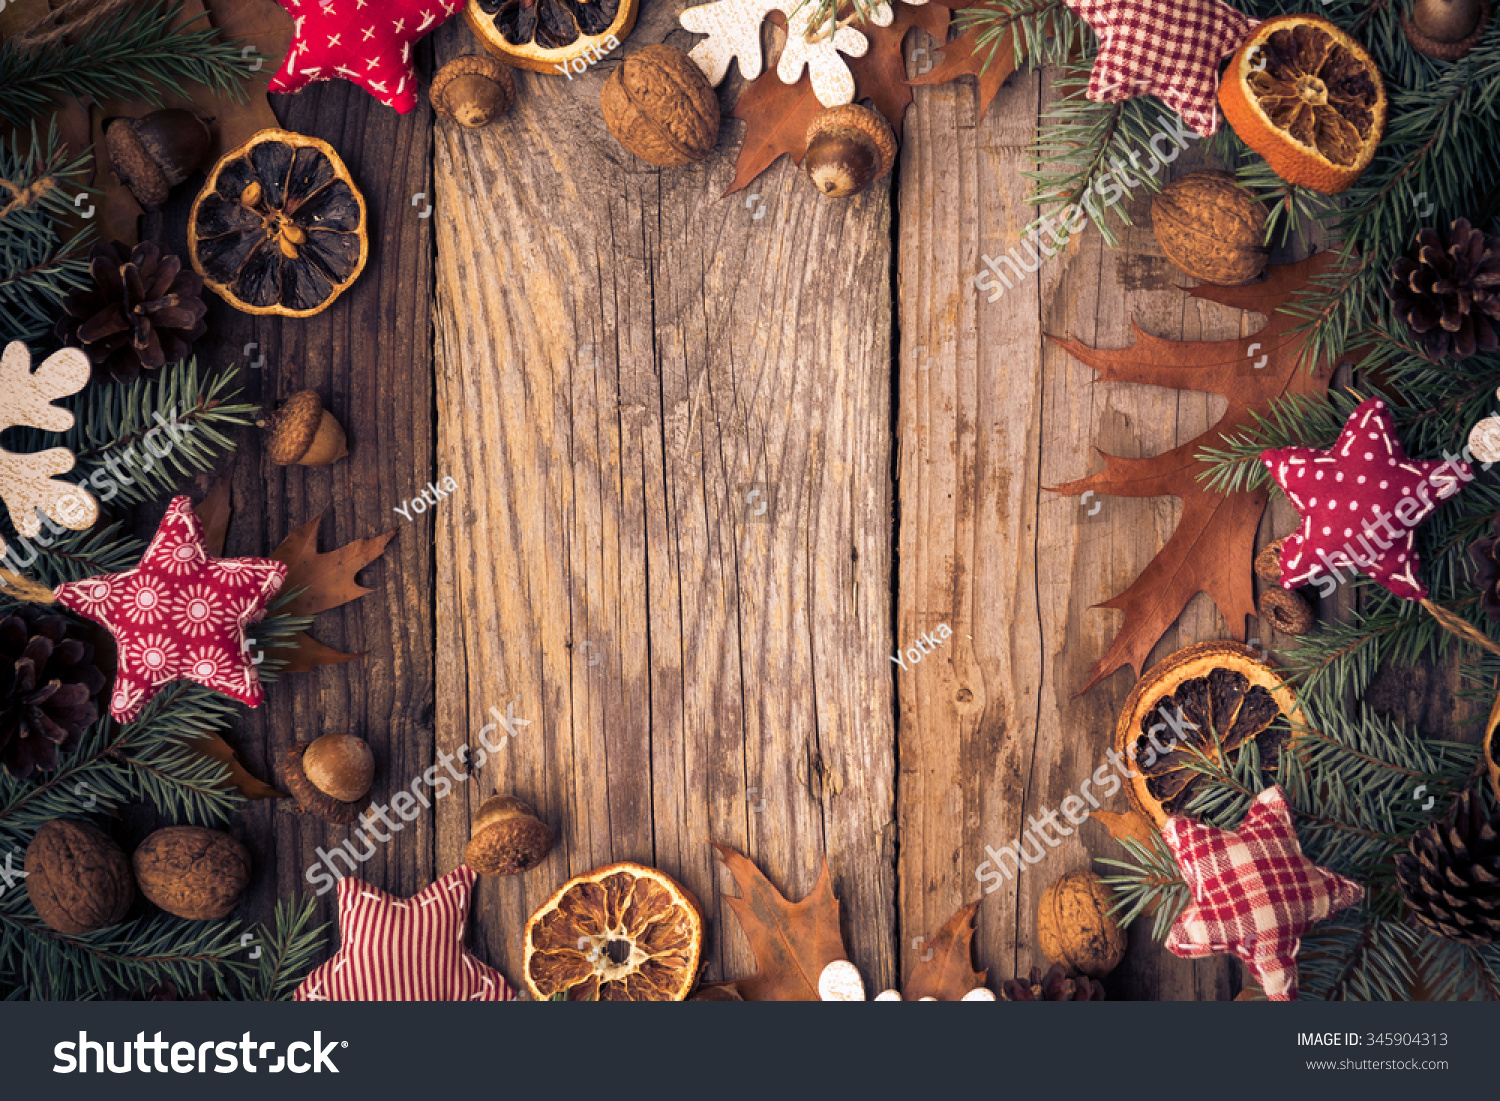 Christmas background with twigs, decorations and gifts of nature #345904313